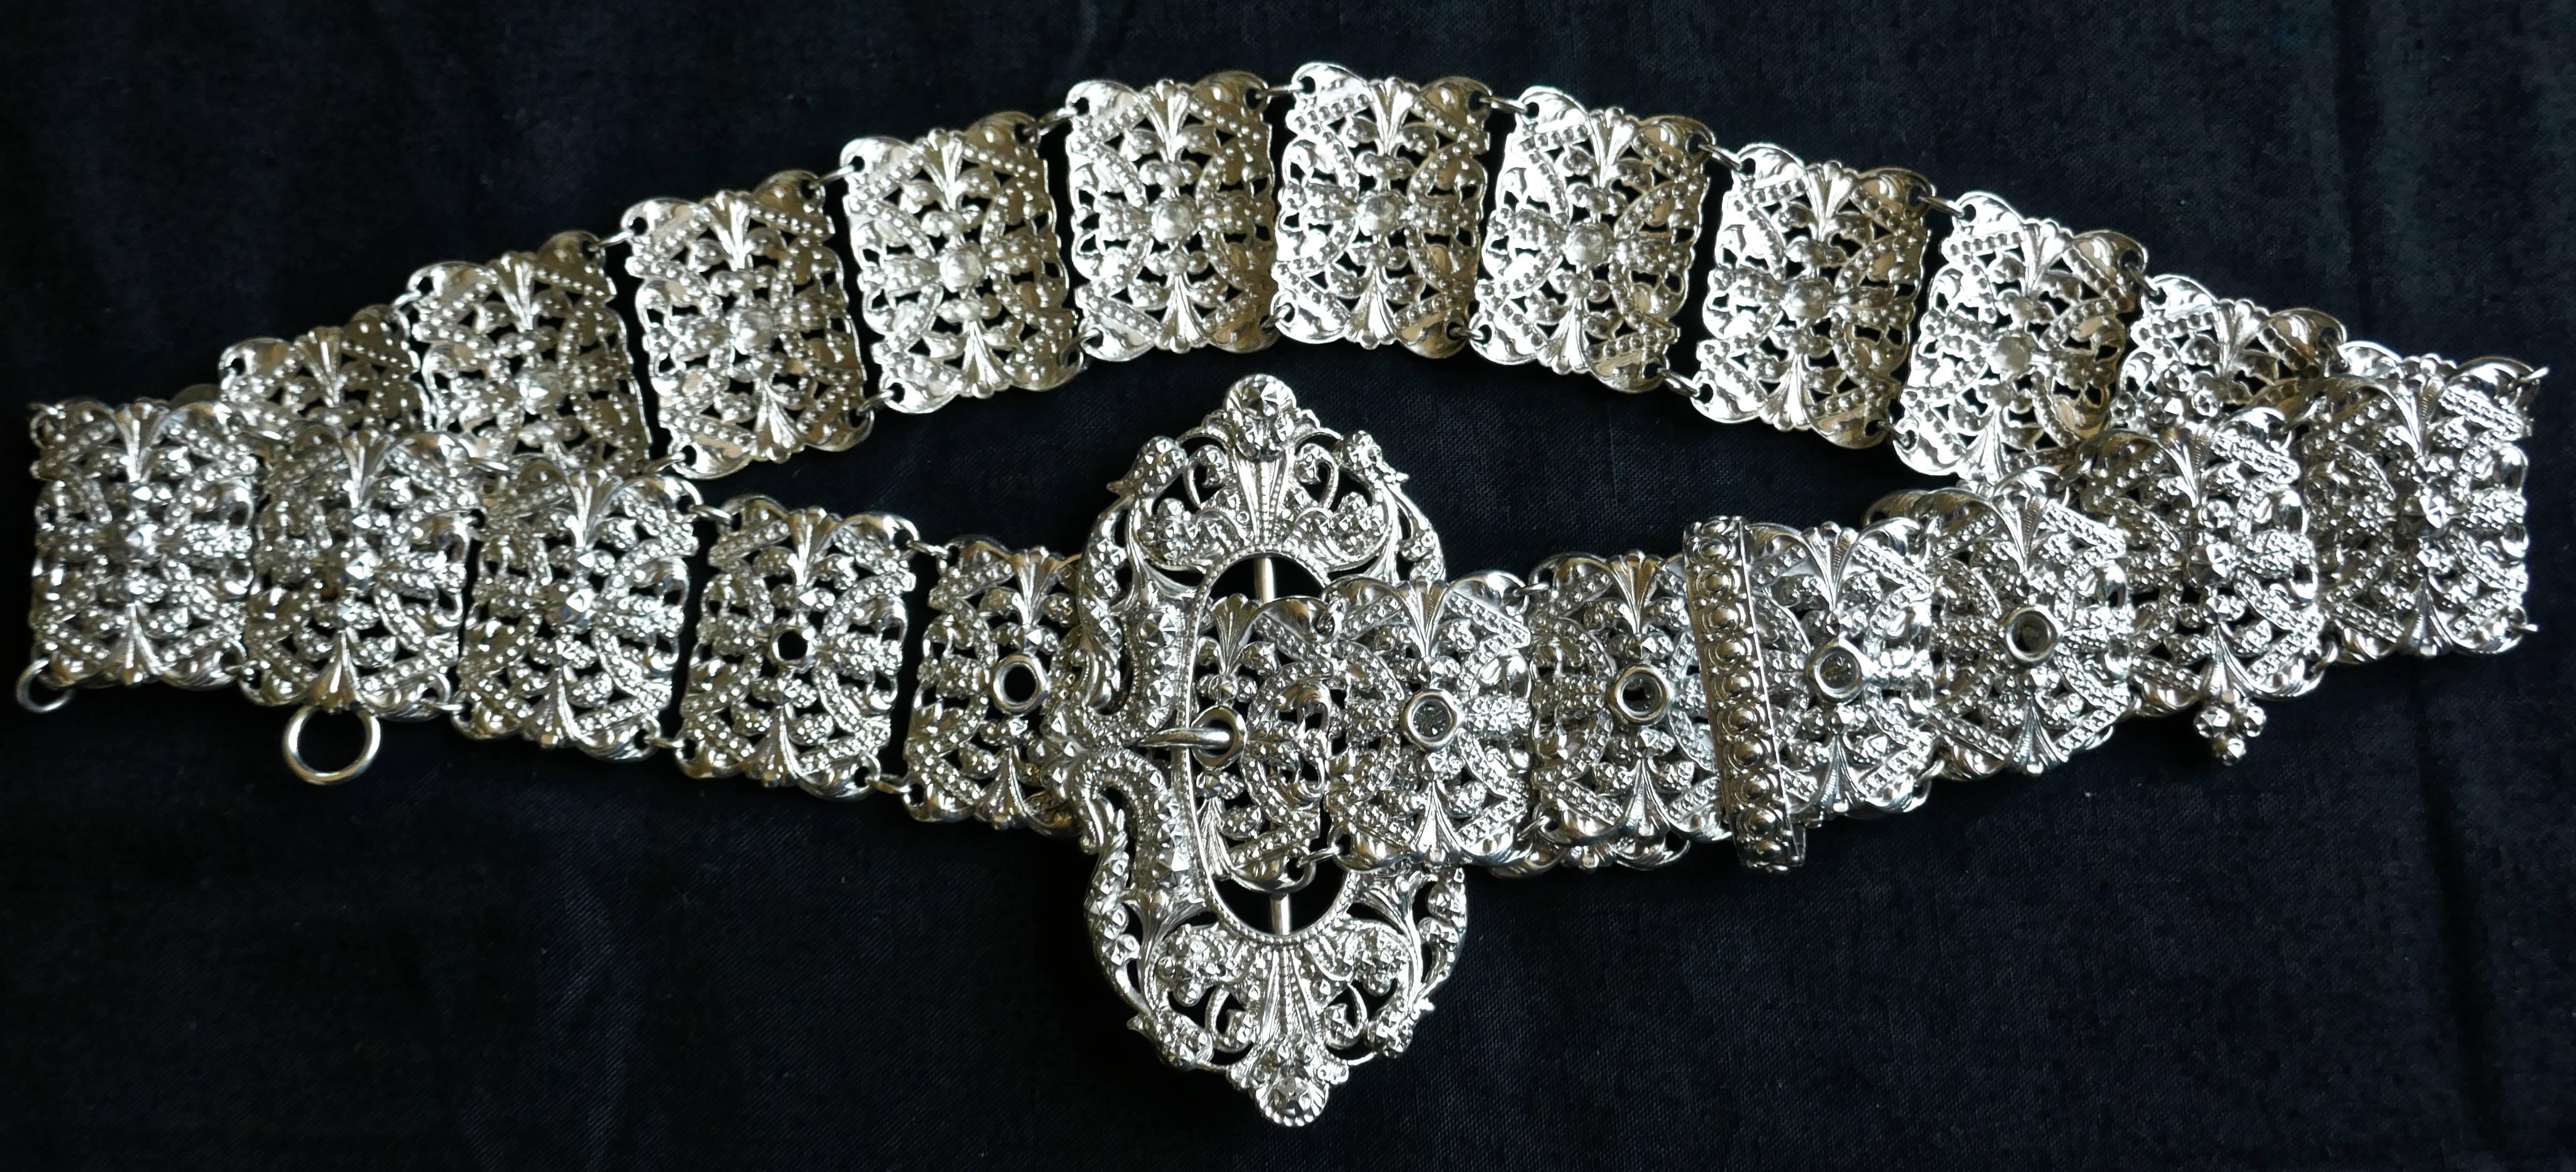 French Arts and Crafts silver belt, articulated links with chatelaine ring

This is a stunning, piece, the belt is composed of 27, measure: 3.5cm x 2.5cm repousse links joined to an oval buckle with a central vertical bar. The detail is exquisite,